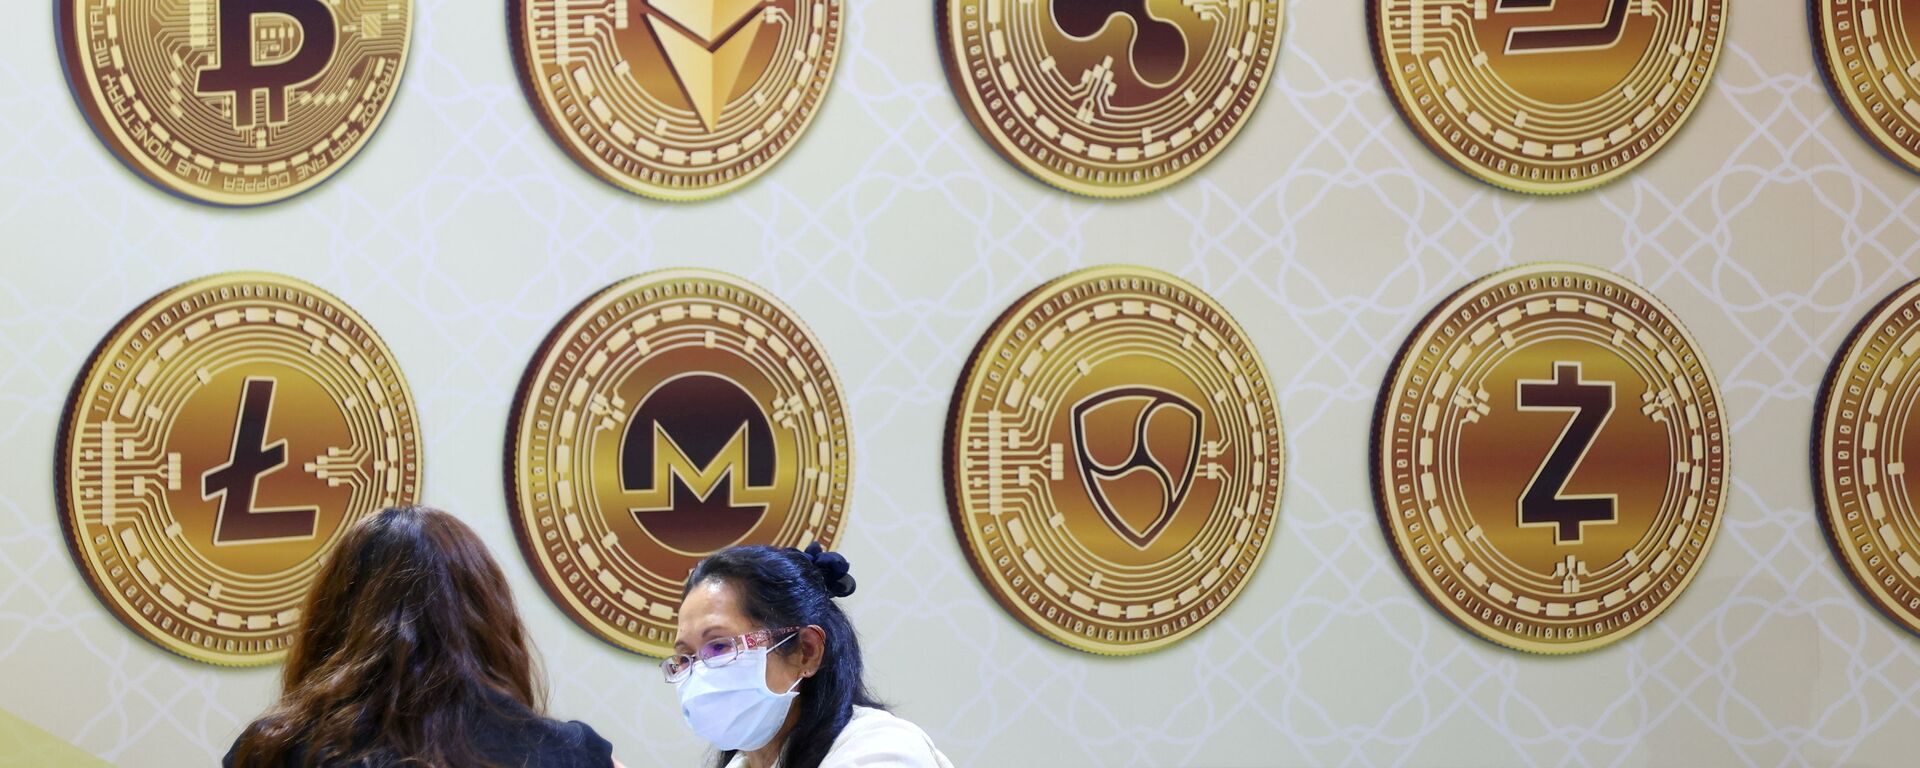 Customers talk against a backboard with signs of cryptocurrency during 2020 Taipei International Finance Expo in Taipei, Taiwan, November 27, 2020. REUTERS/Ann Wang/File Photo - Sputnik International, 1920, 06.09.2021